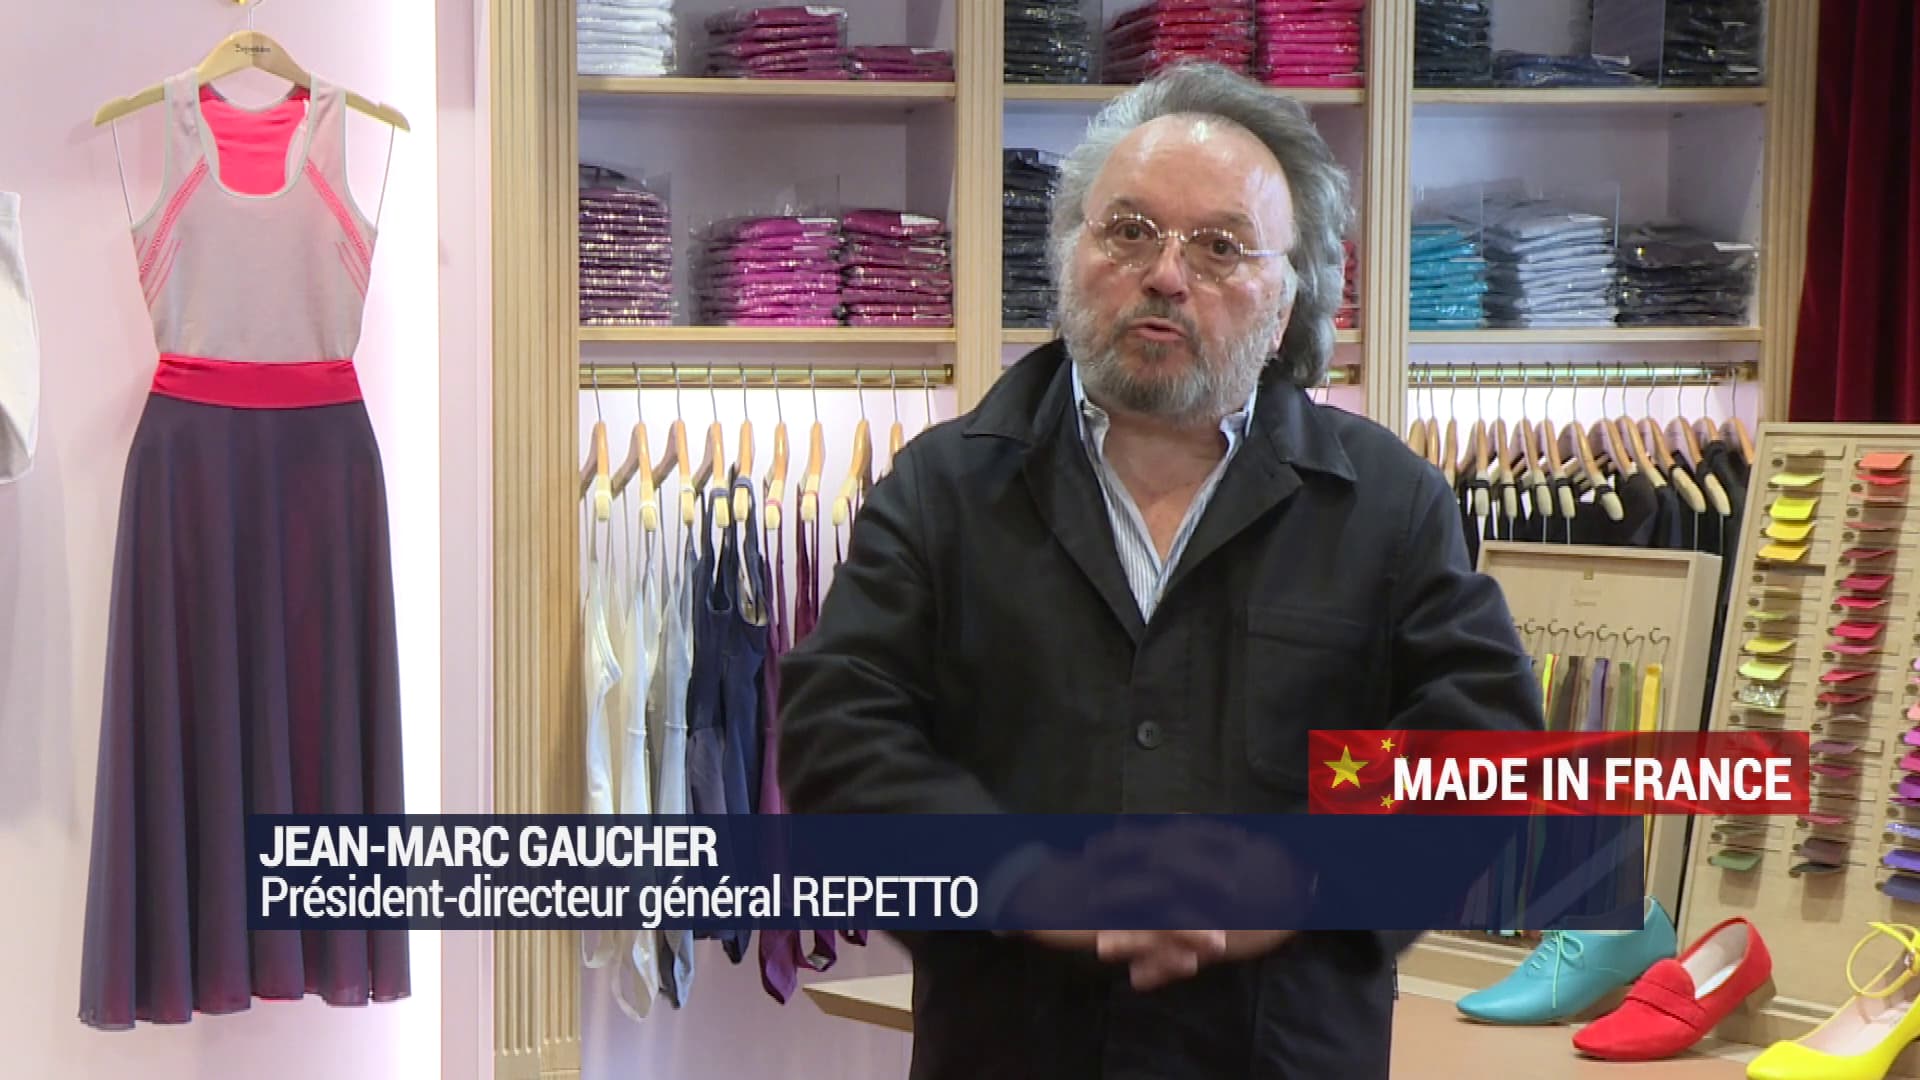 Jean-Marc Gaucher, President and CEO of Repetto, Dies at 70